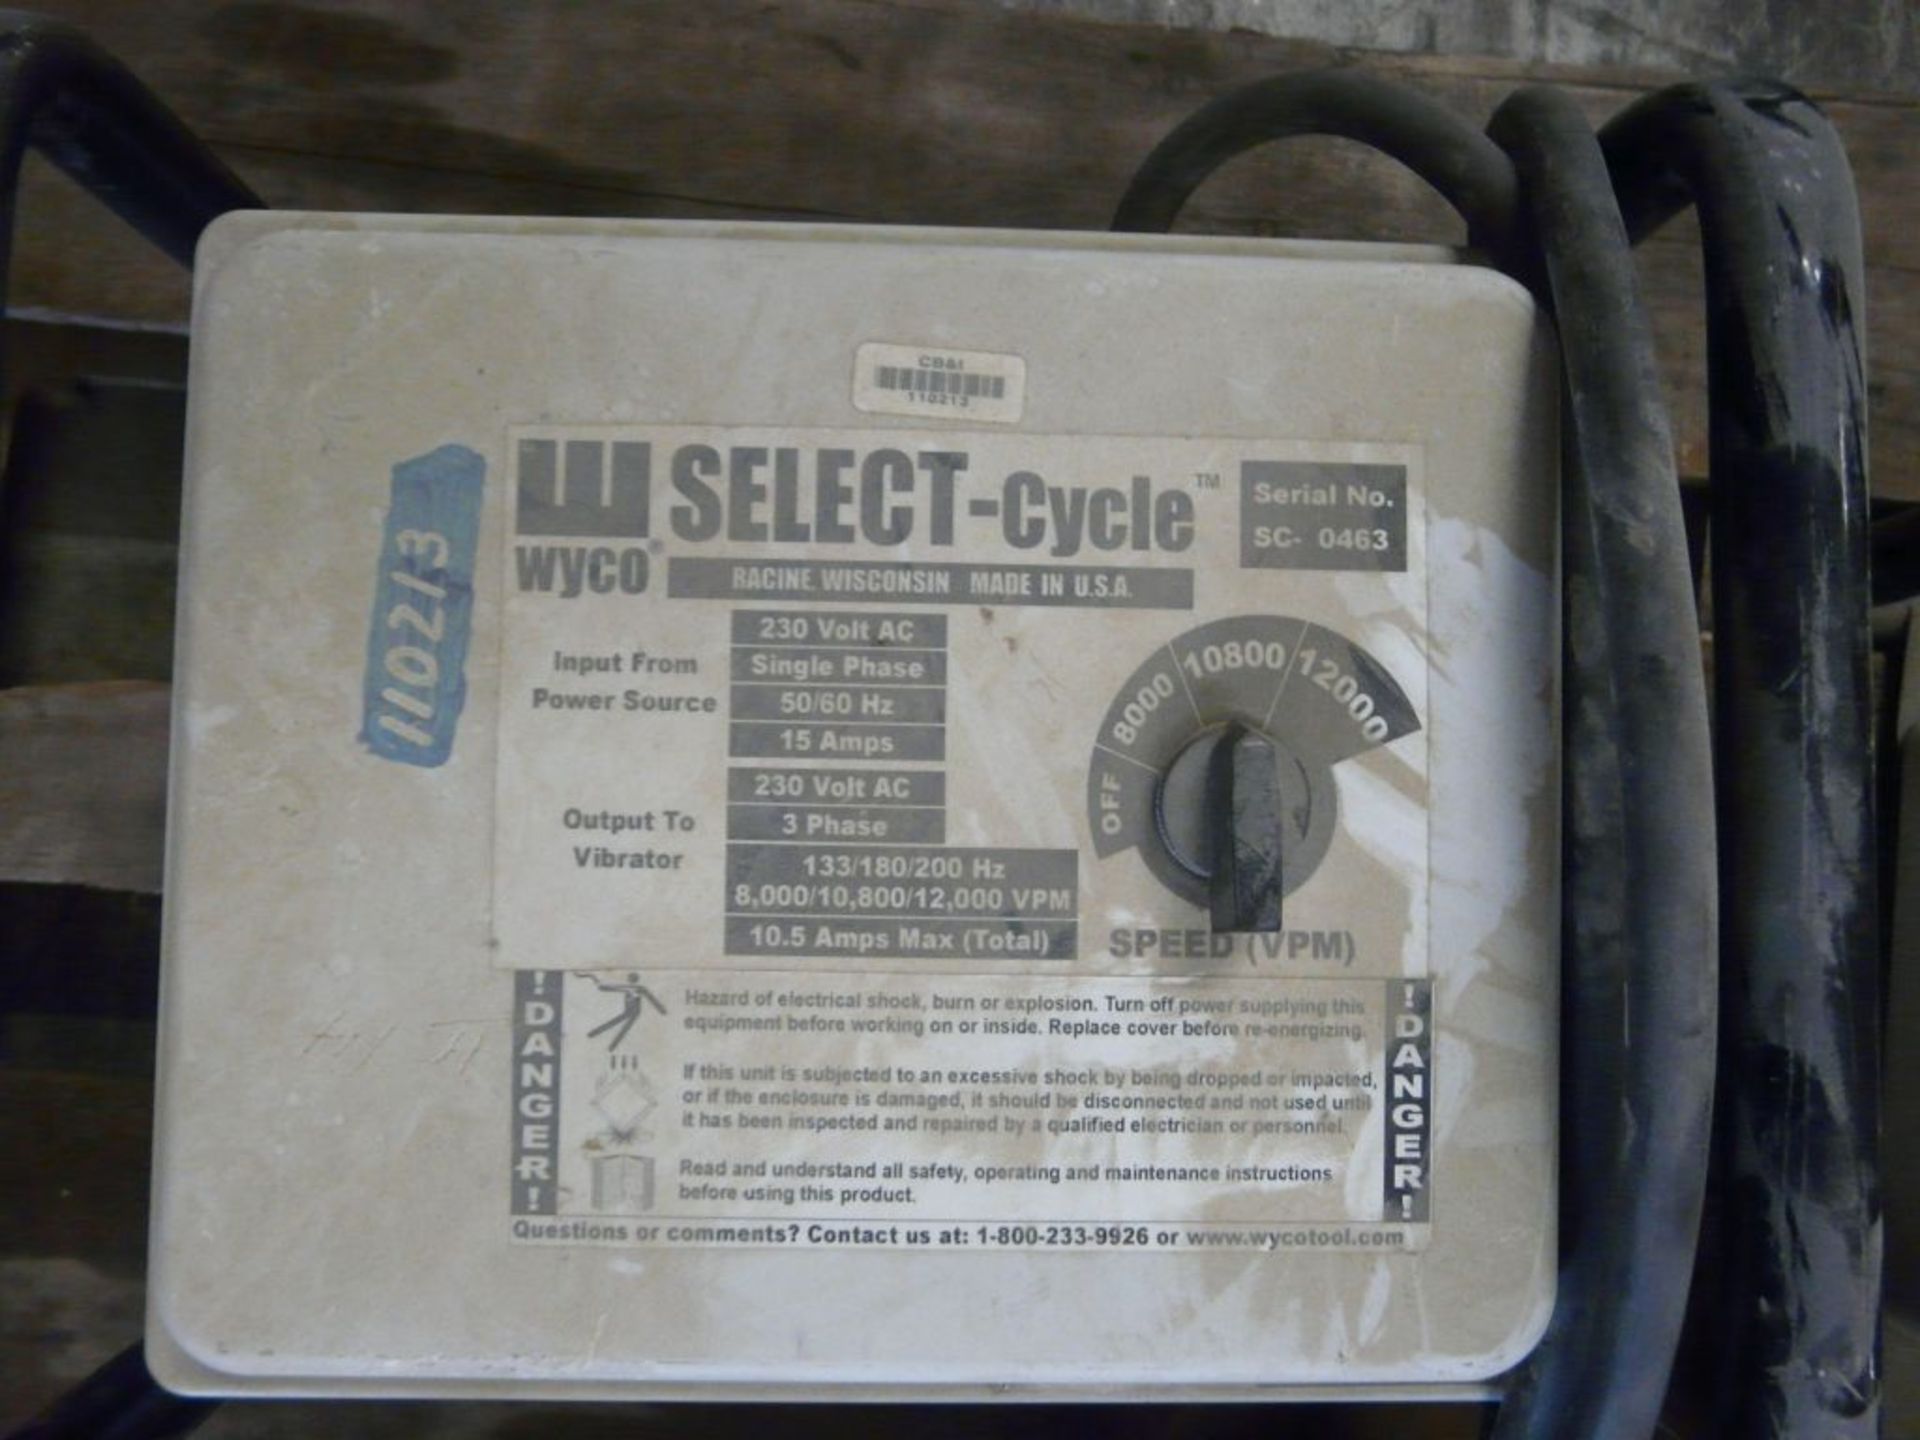 Lot of (4) Select Cycle Converter Boxes|230V; Input from Power Source: 15A, 230V, 1PH; Output to - Image 6 of 7